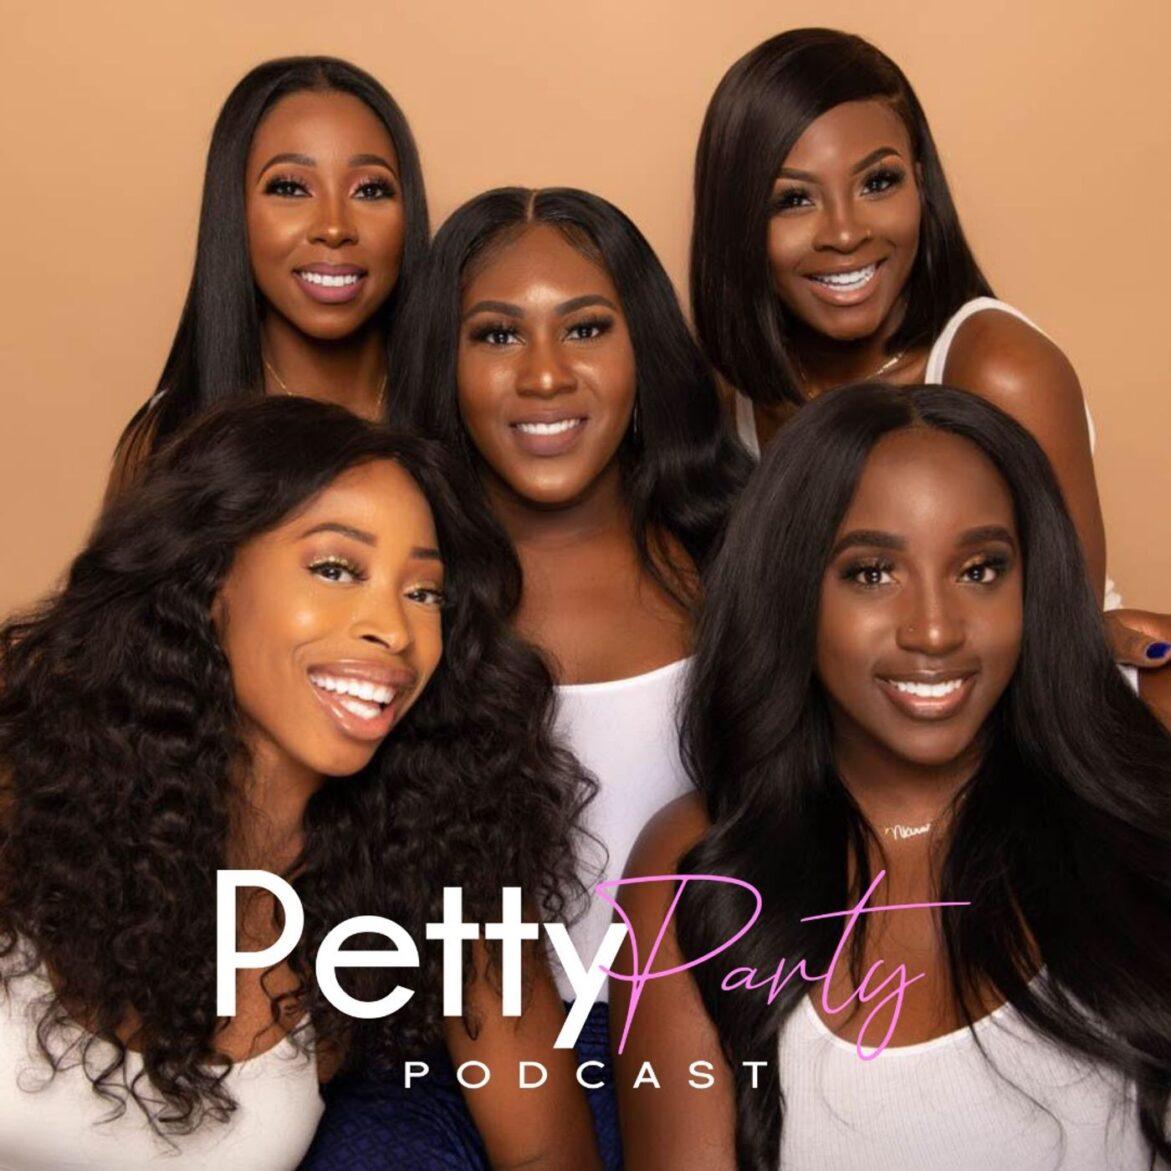 Black Podcasting - Are You A Girl’s Girl?